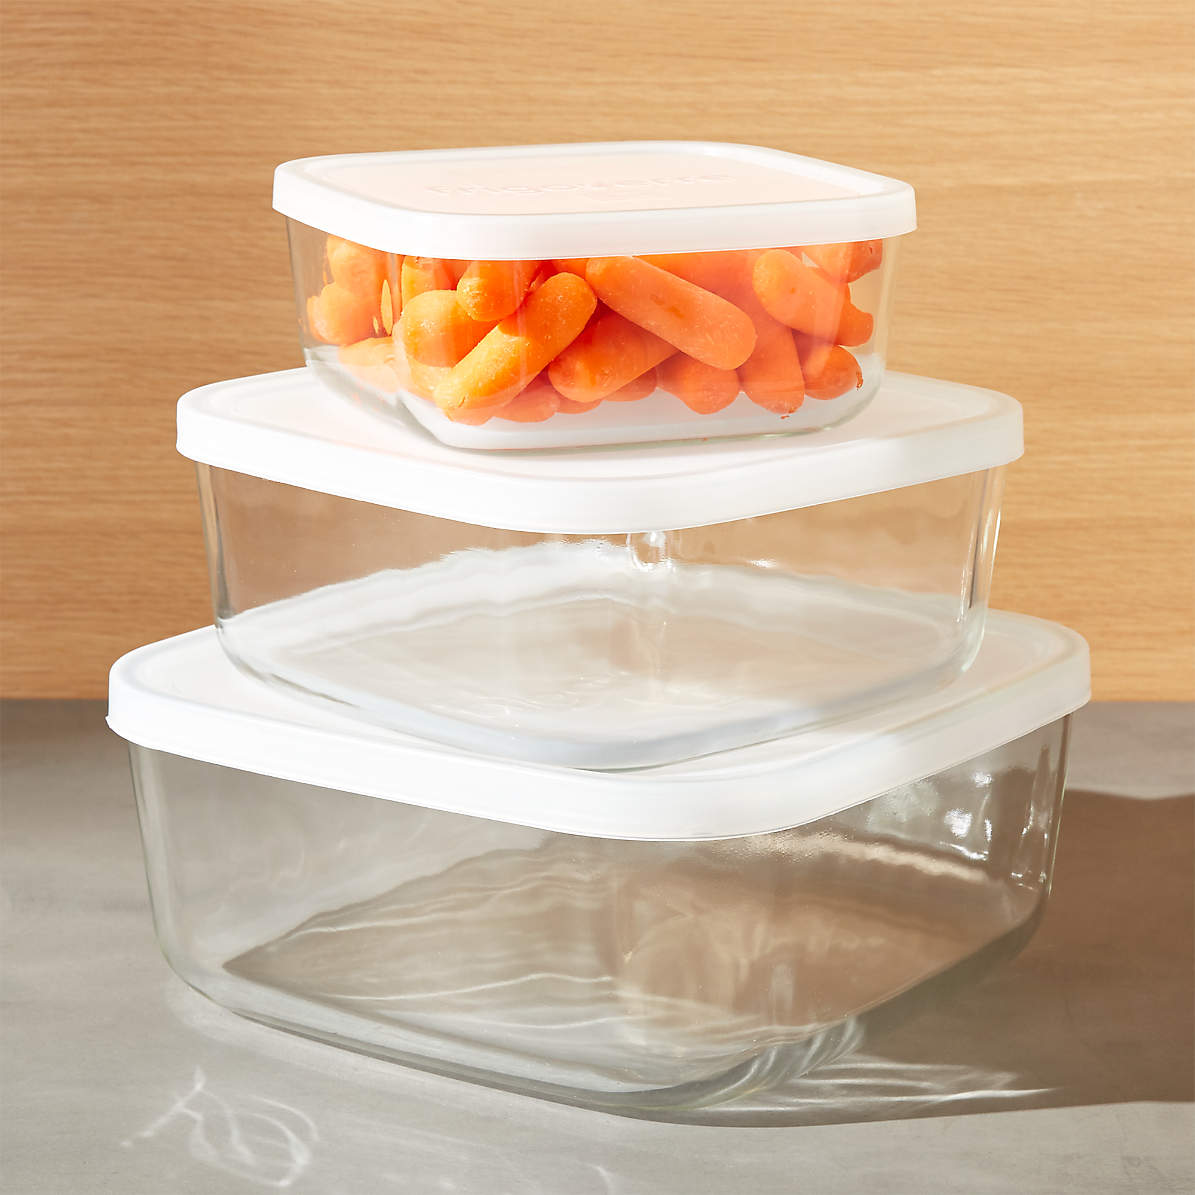 3-Piece Tall Glass Storage Container Set